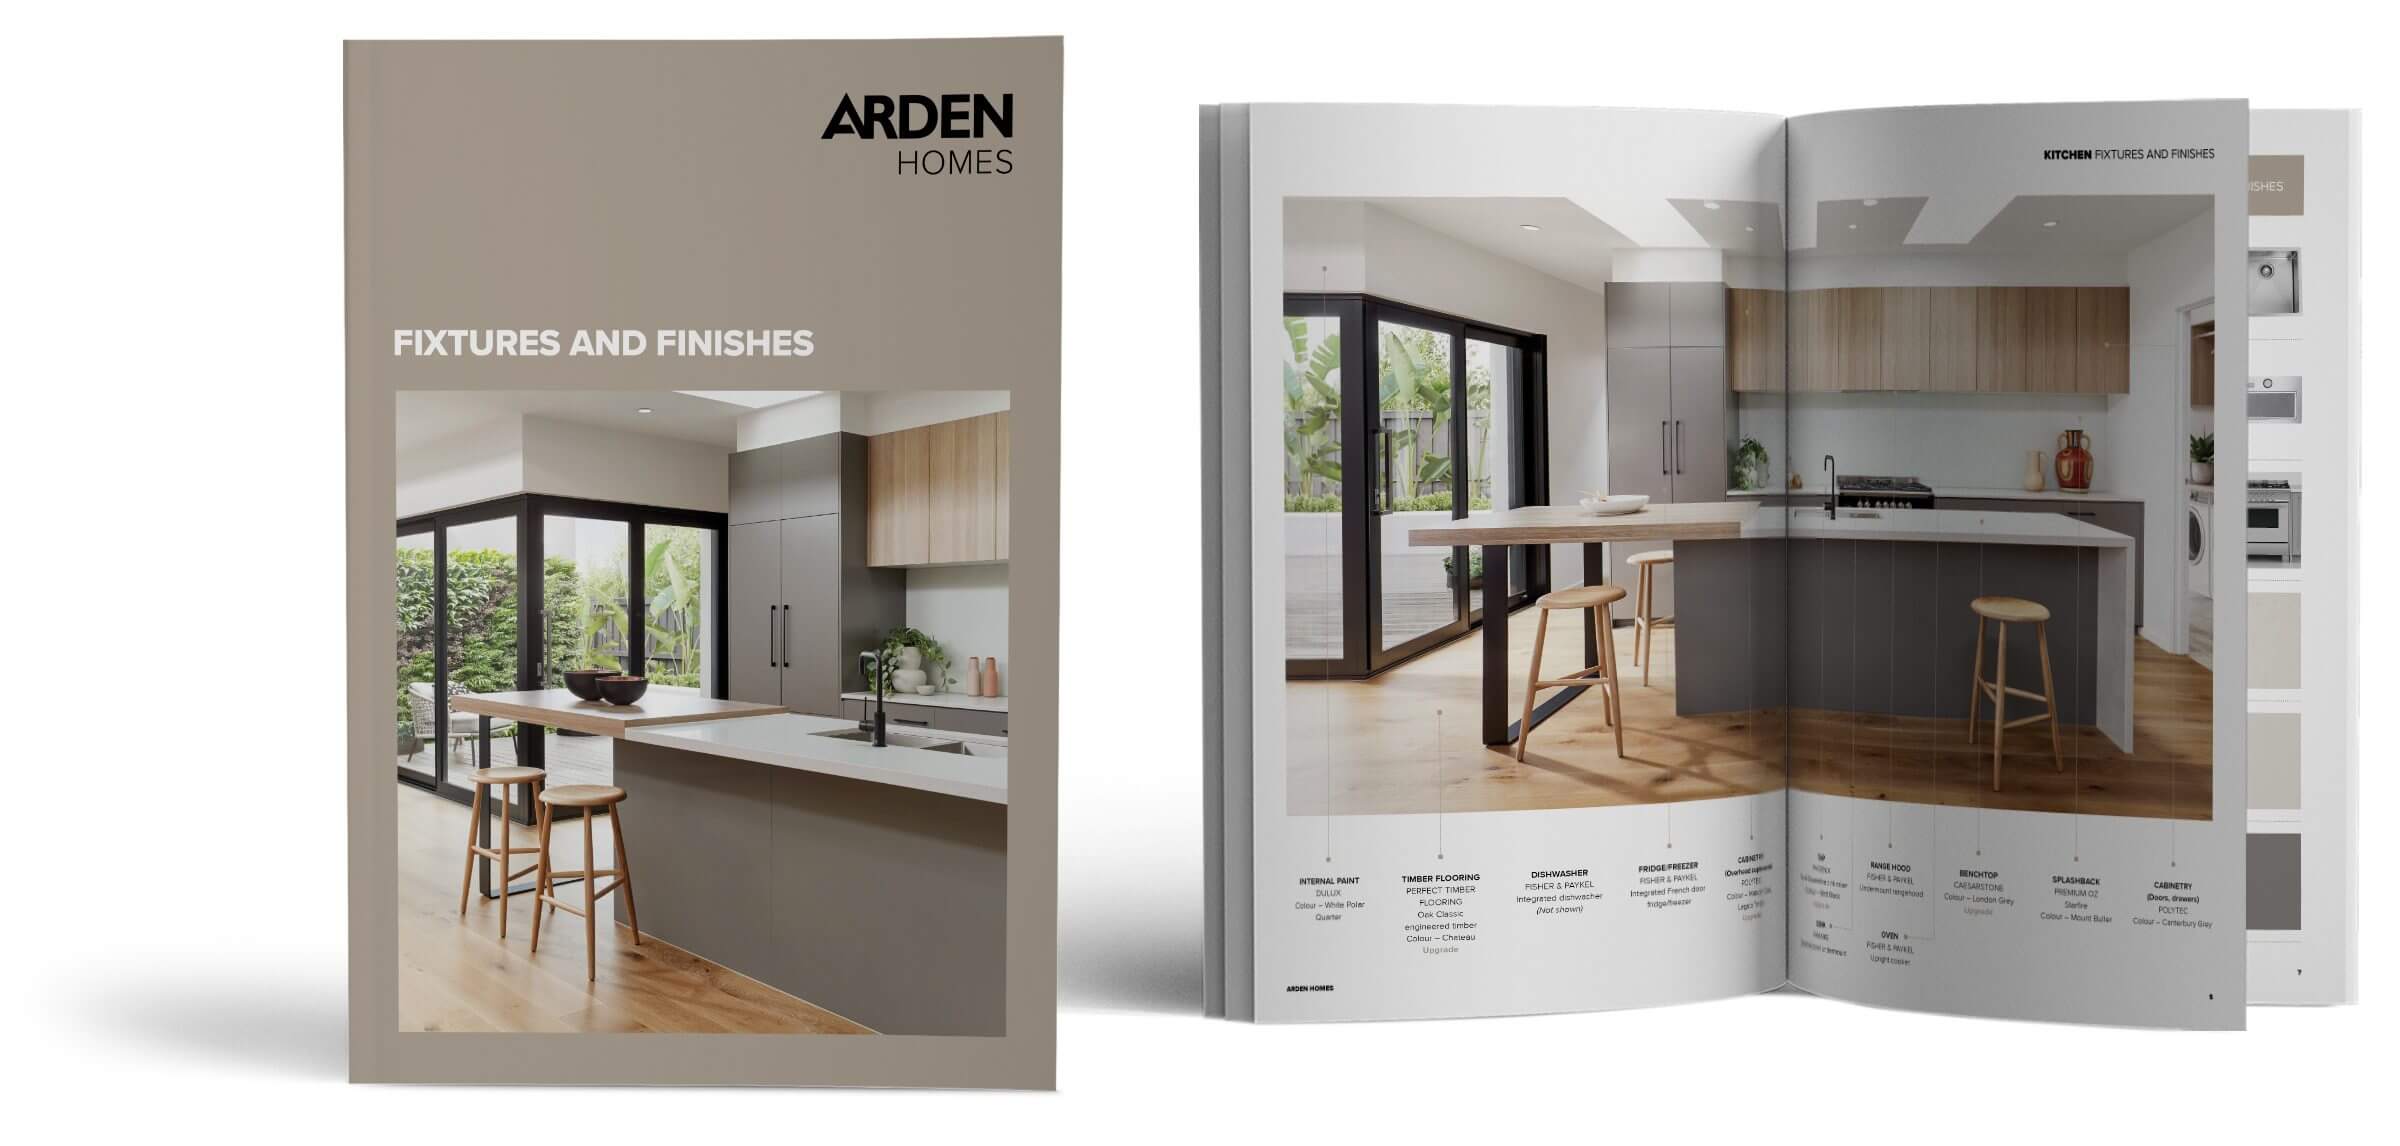 Arden Homes Fixtures and Fittings